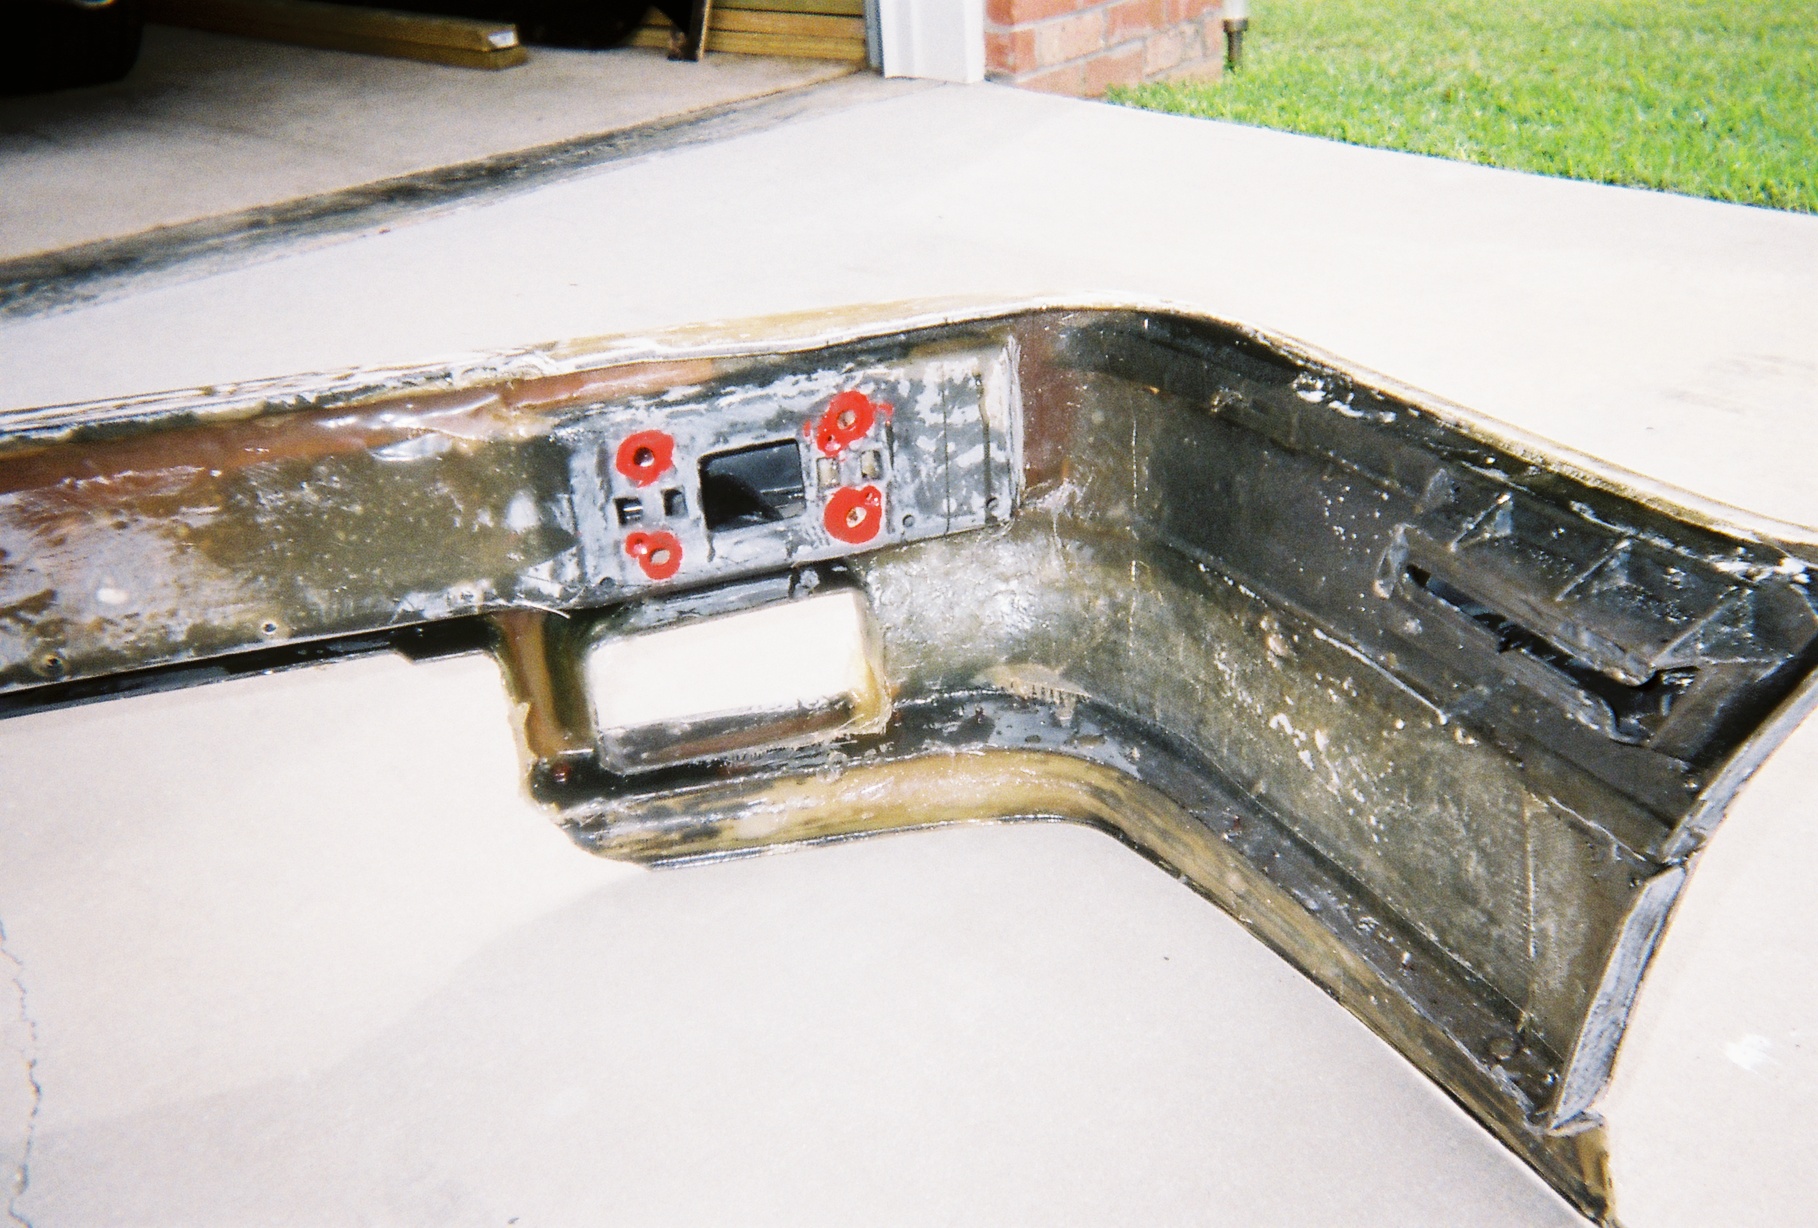 1989 Ford escort bumpers